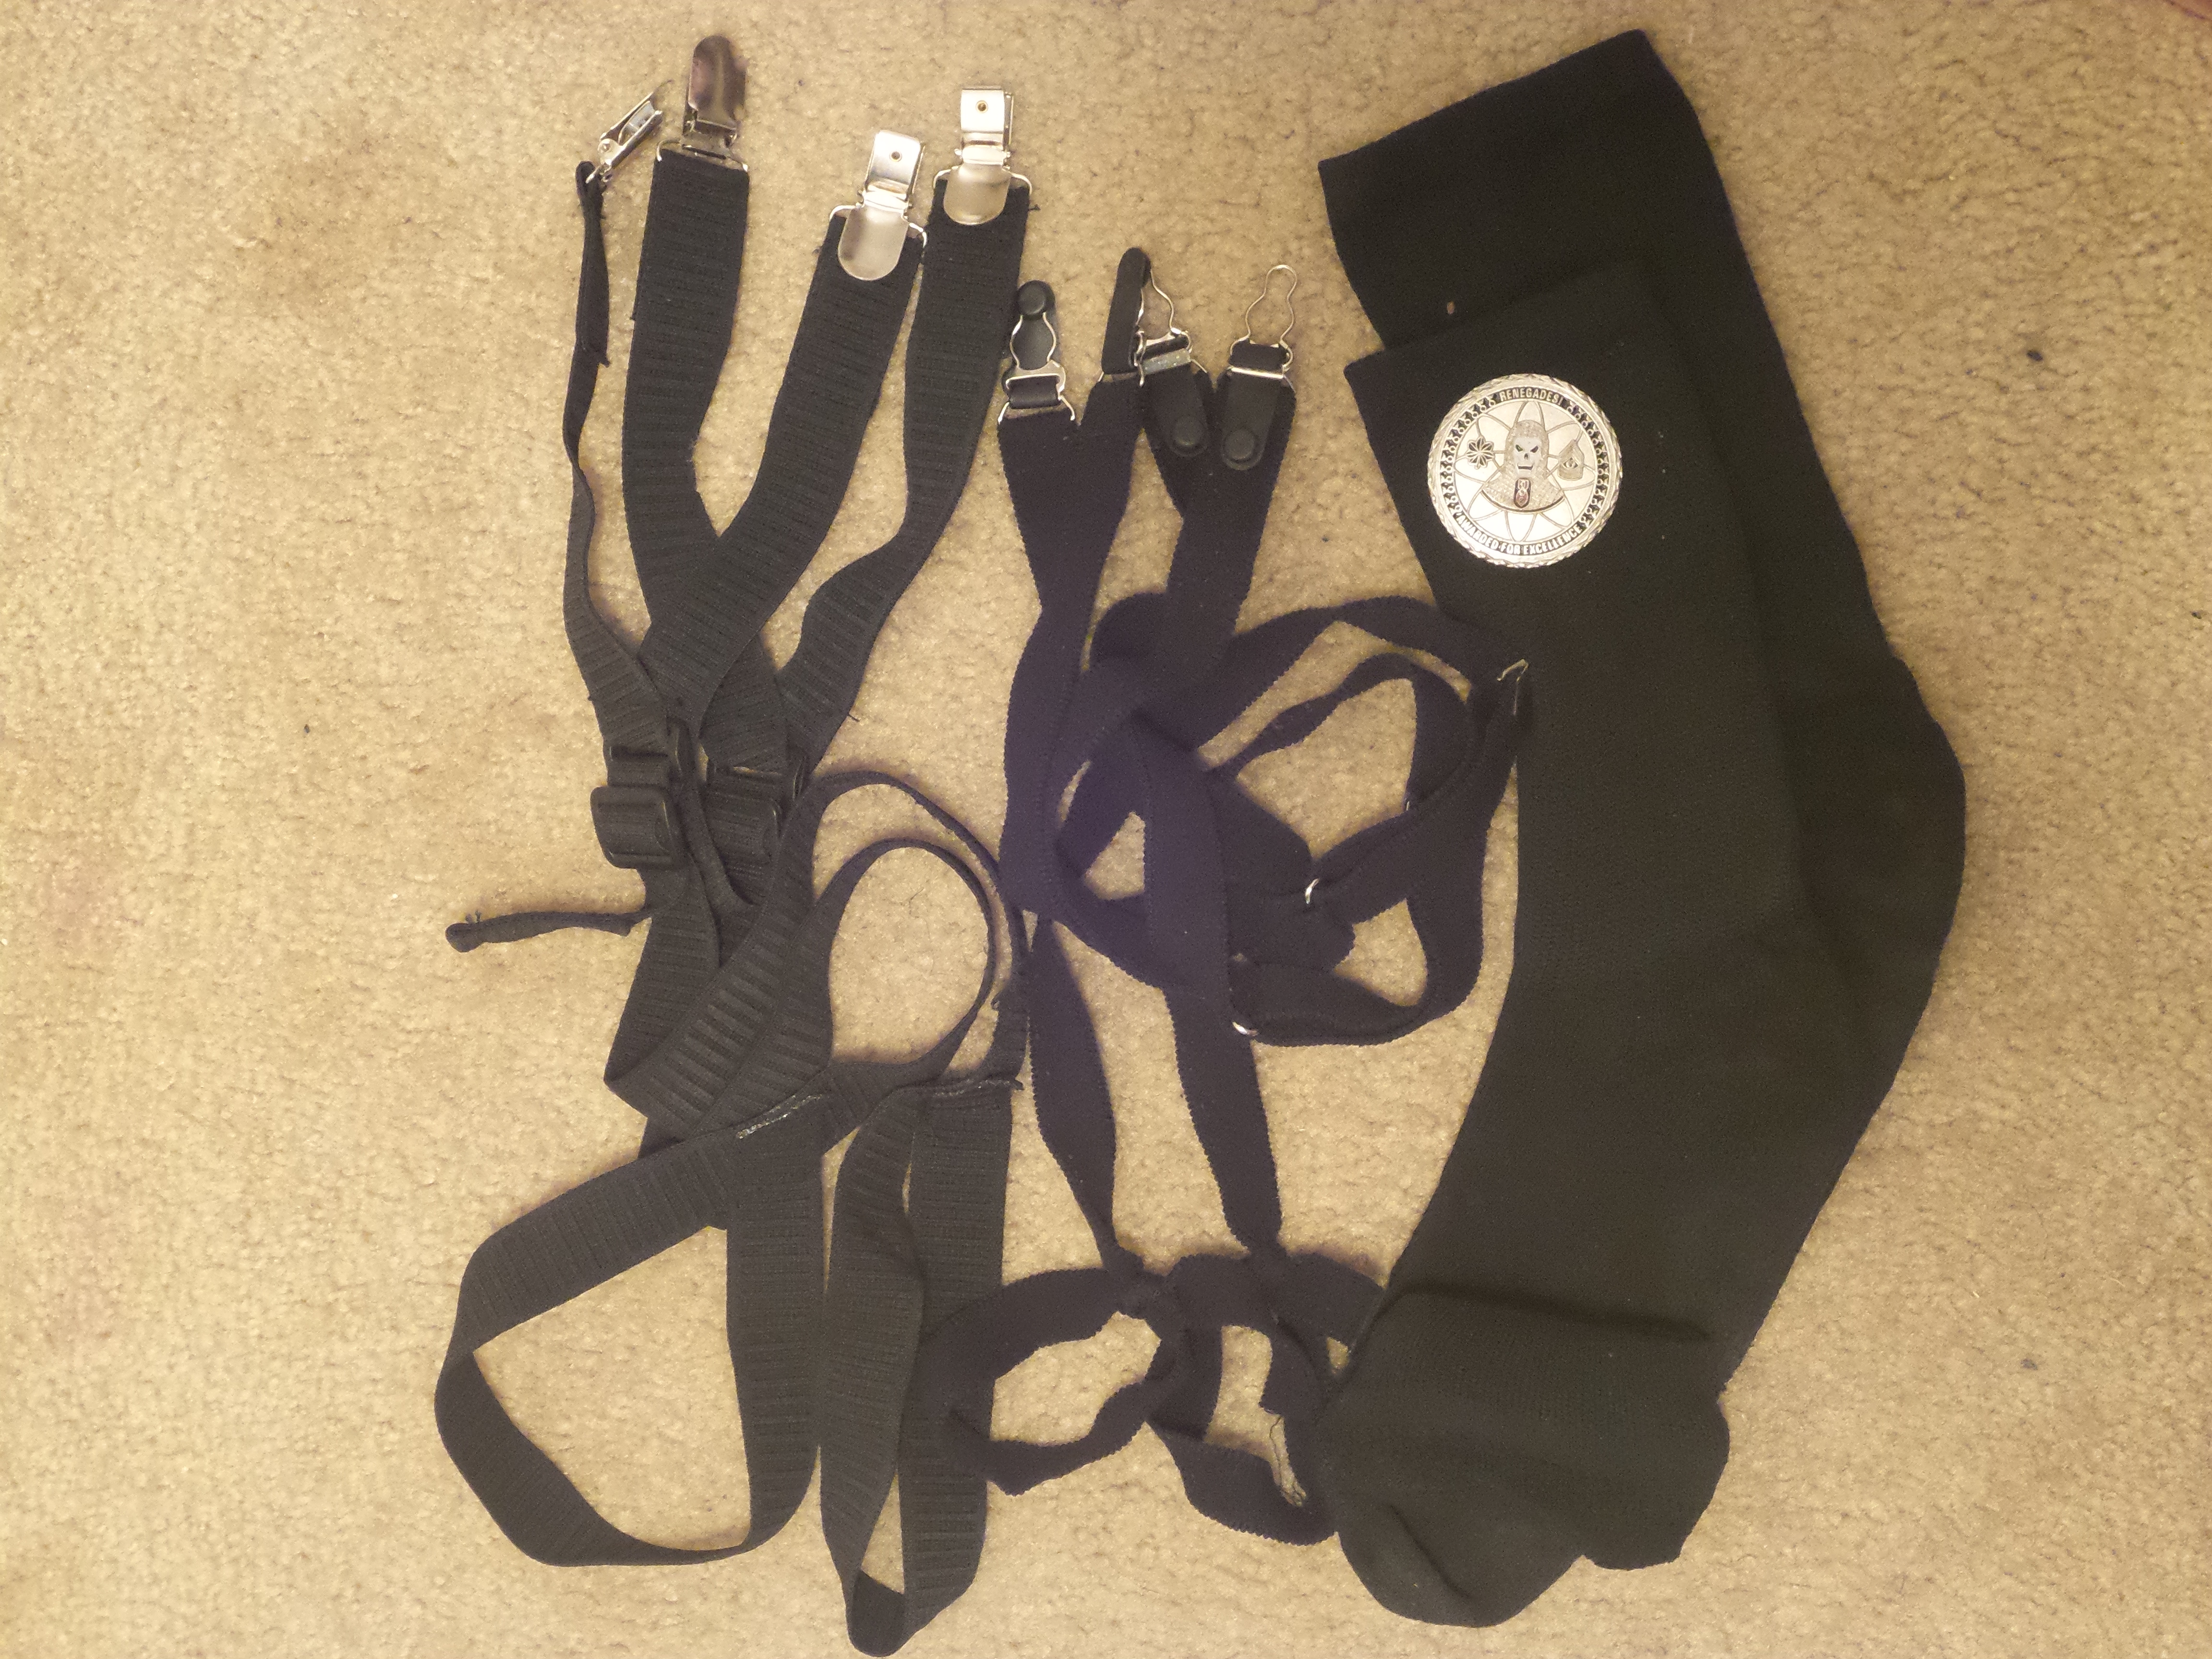 military dress uniform upgrade items - Y and stirrup style shirt stays, black socks, and an EOD challenge coin